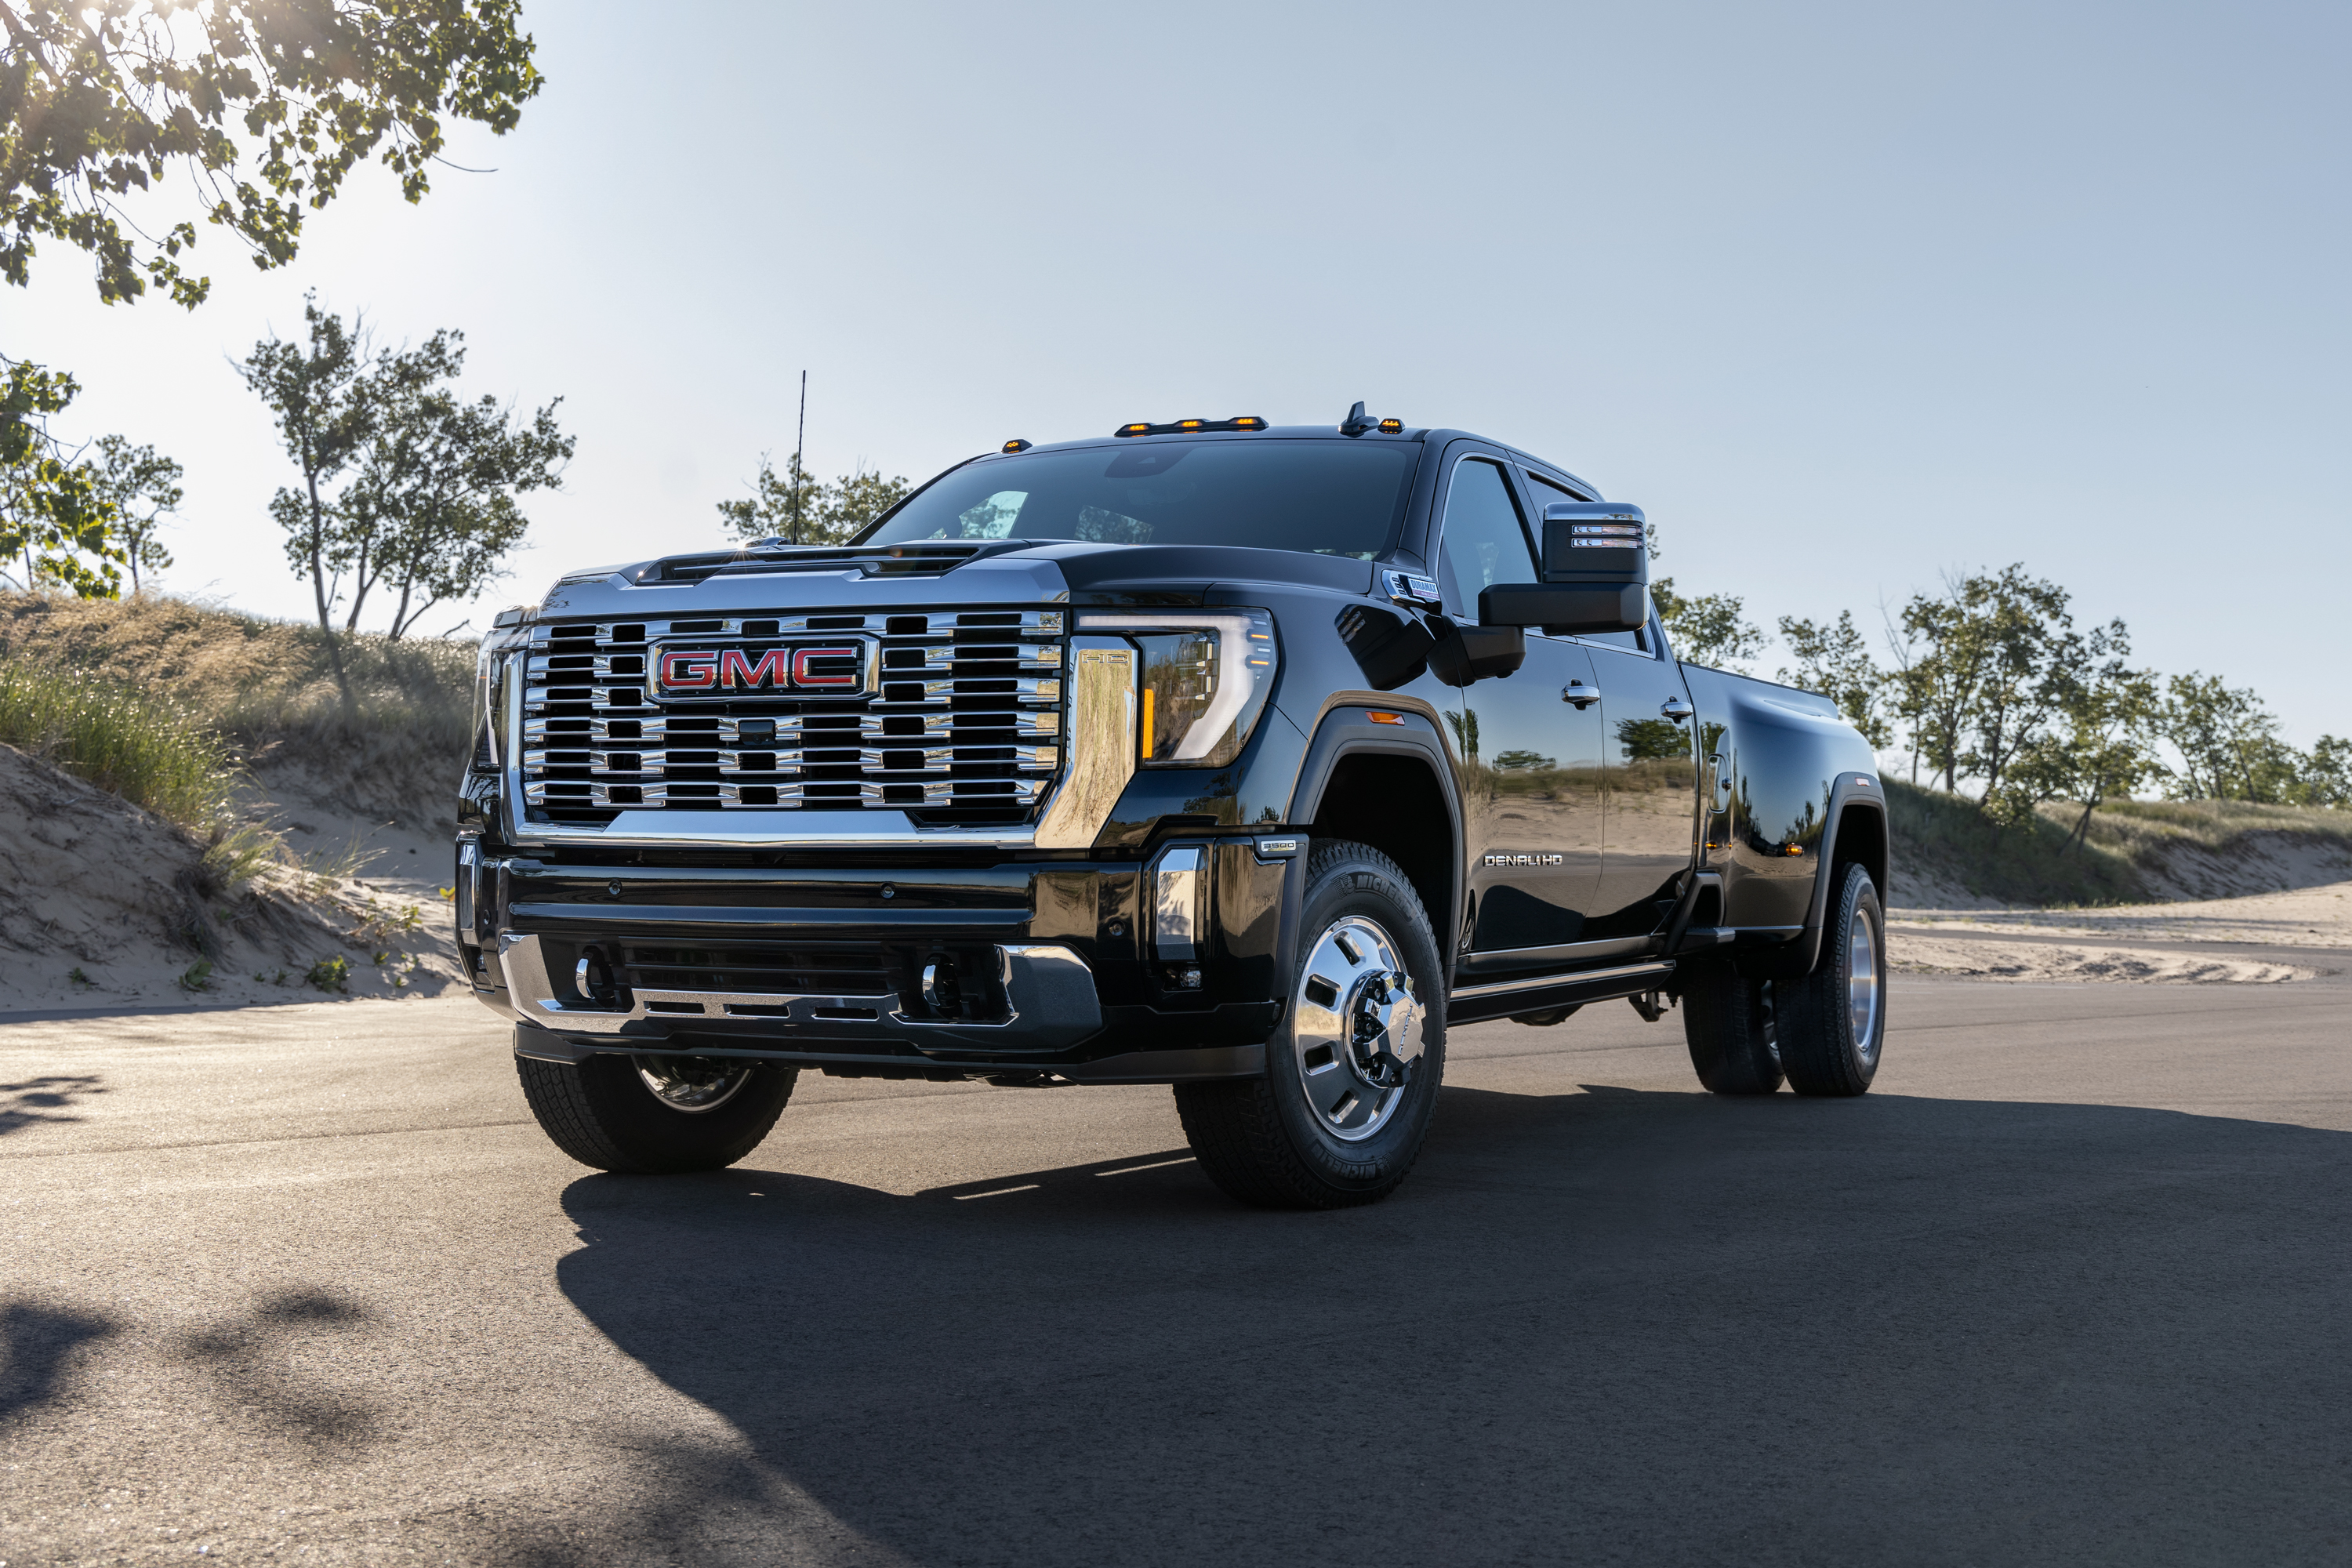 What Makes a Pickup Truck Heavy Duty?